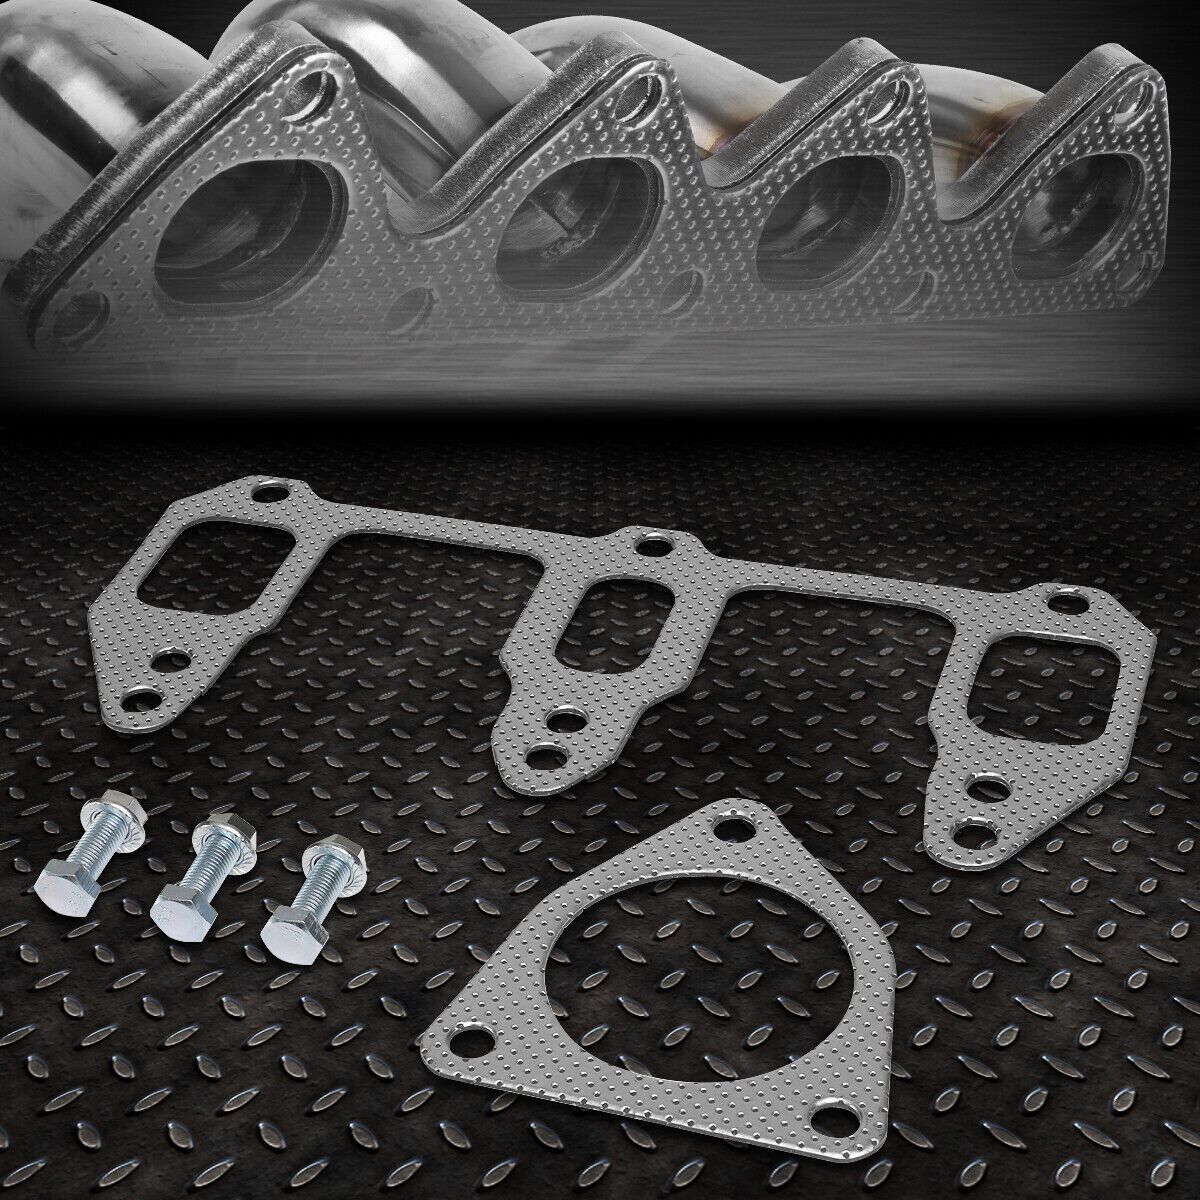 FOR 04-11 MAZDA RX8 1.3L ALUMINUM EXHAUST MANIFOLD HEADER GASKET SET W/BOLTS